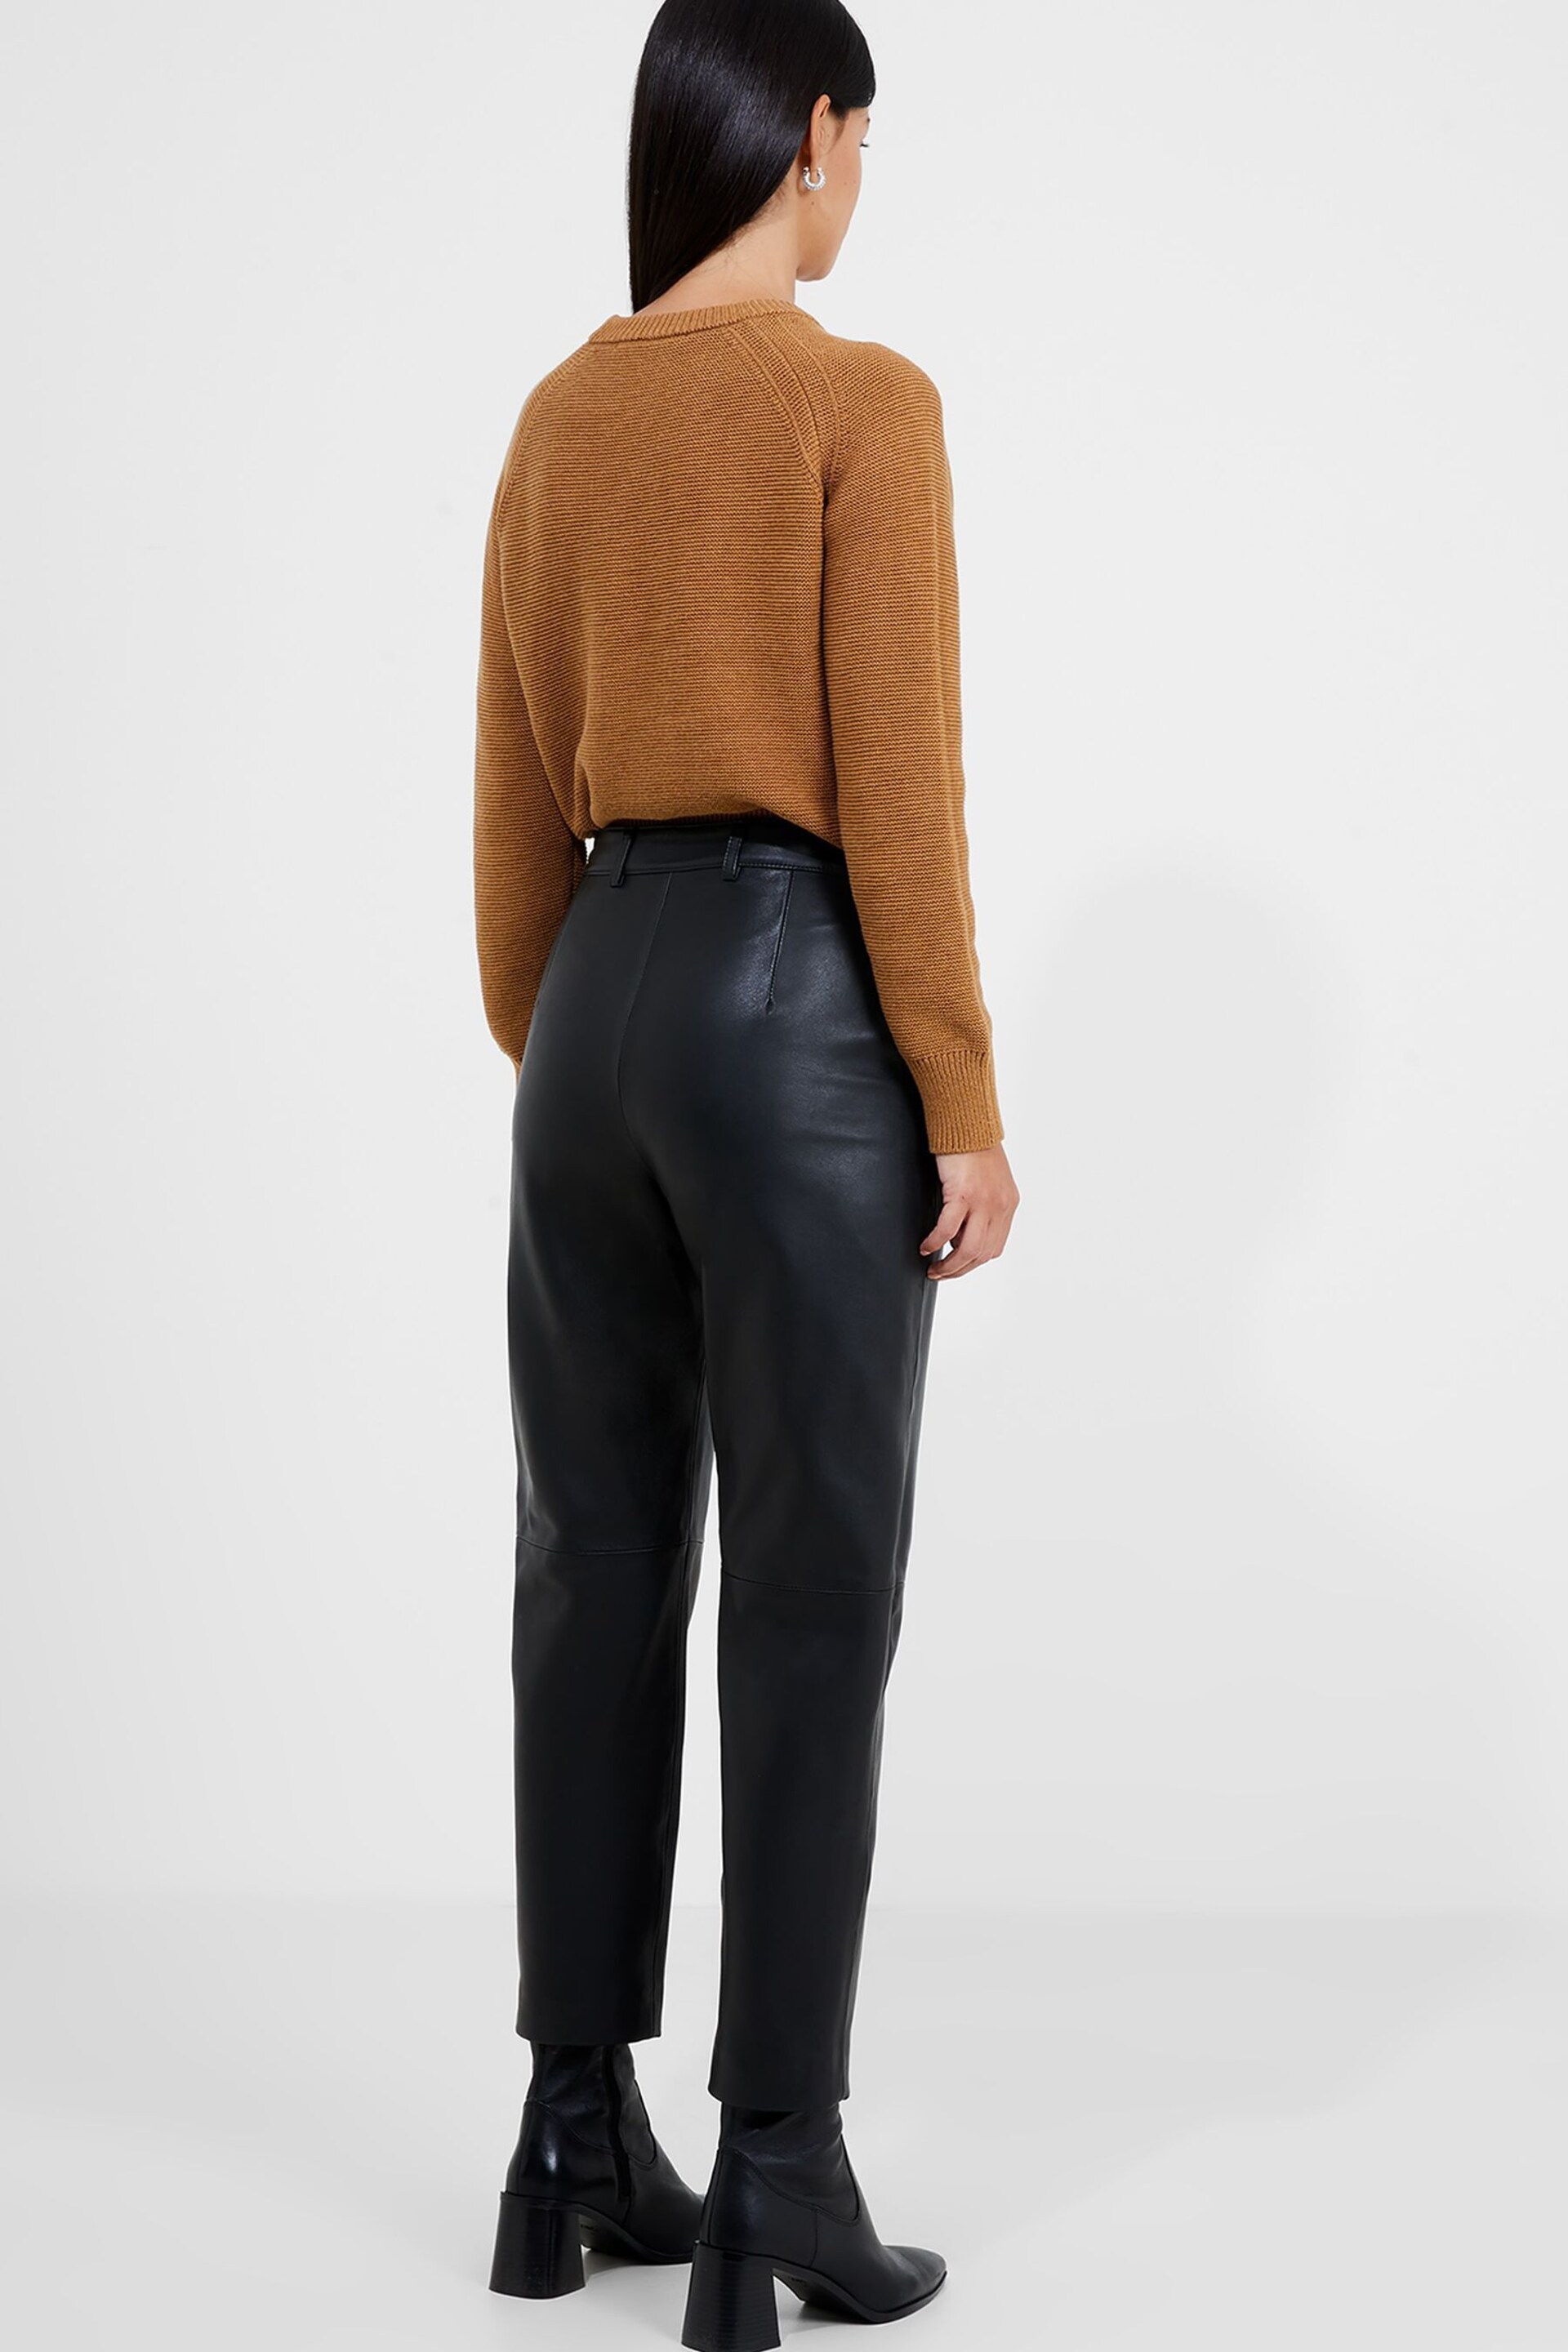 French Connection Connie Leather Trousers - Image 2 of 4